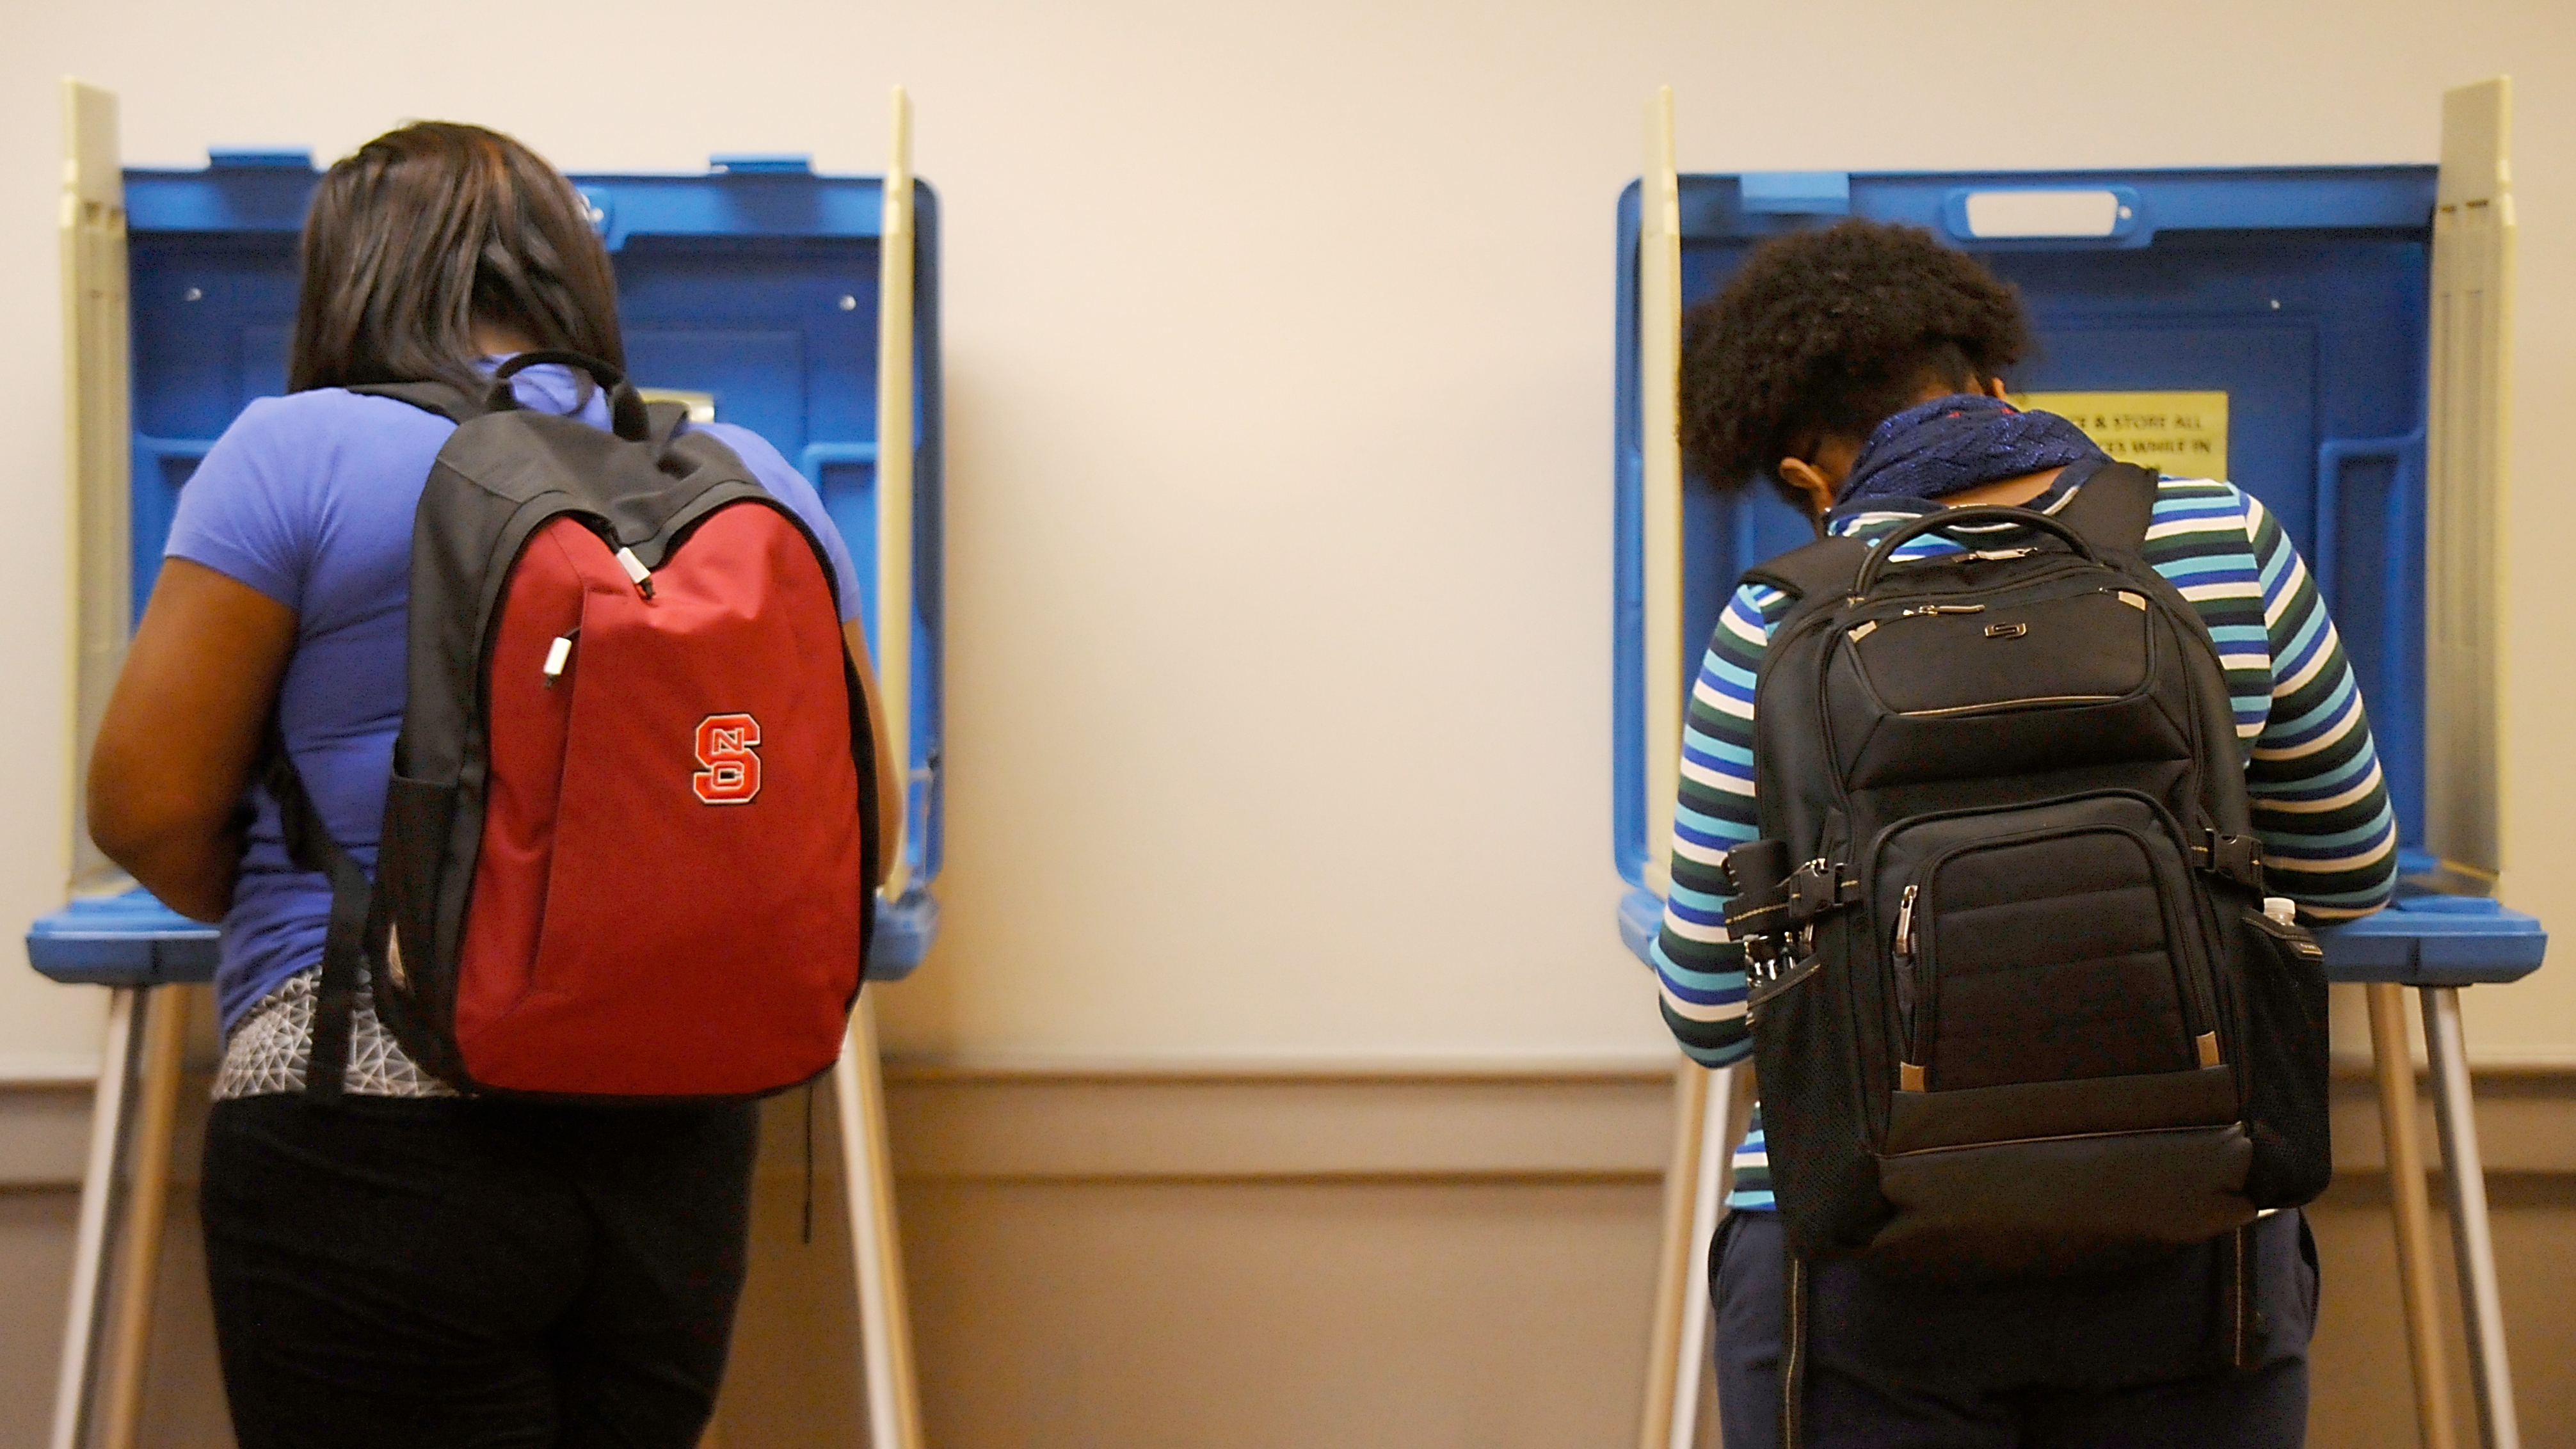 North Carolina State University students vote in the primaries at Pullen Community Center on March 15 in Raleigh, N.C.